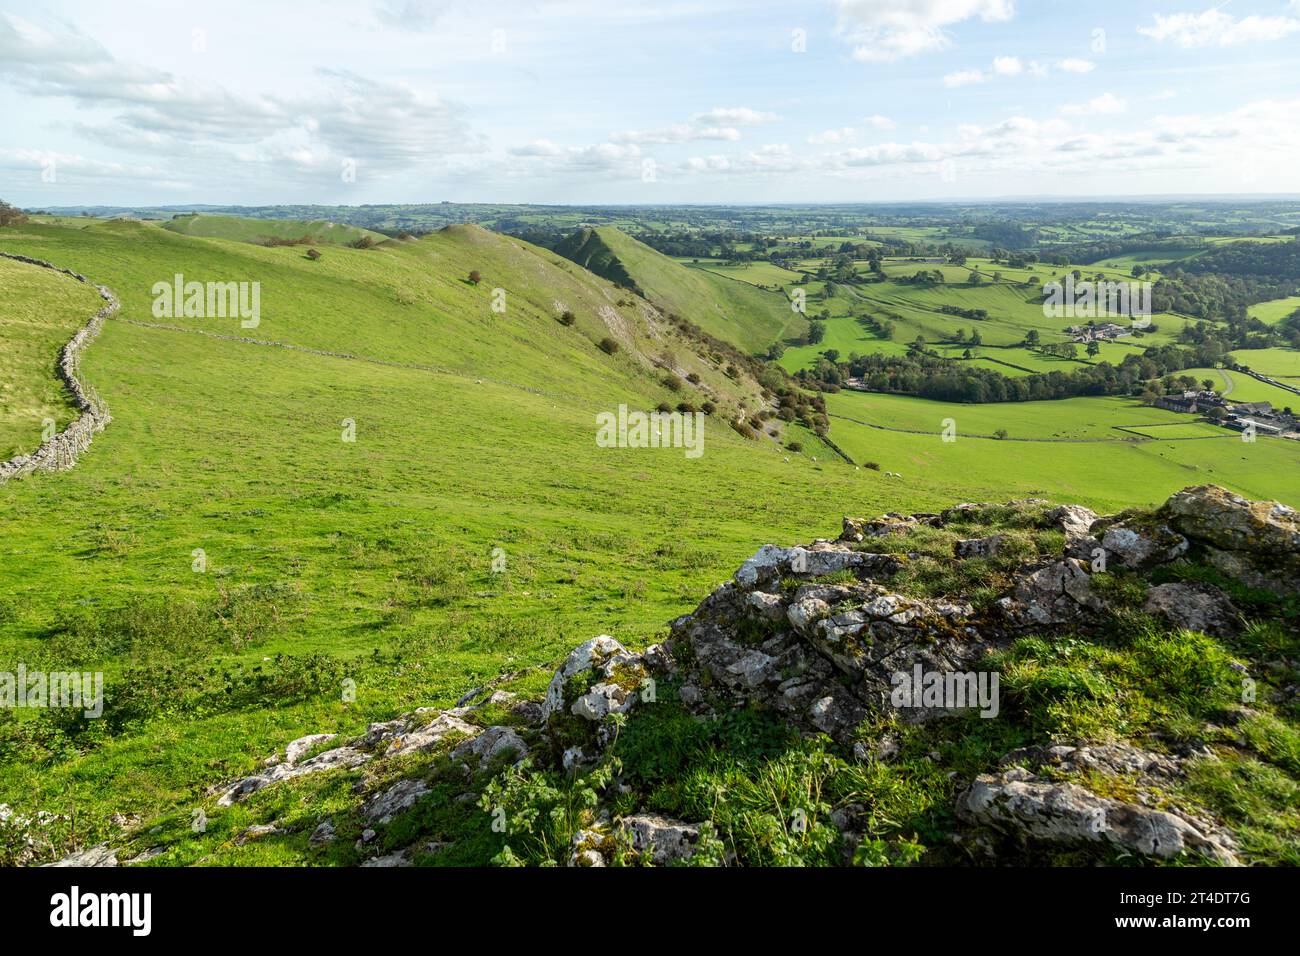 The view from Bunster Hill looking towards Ilam and Thorpe Cloud hill,Peak District, Derbyshire, England Stock Photo